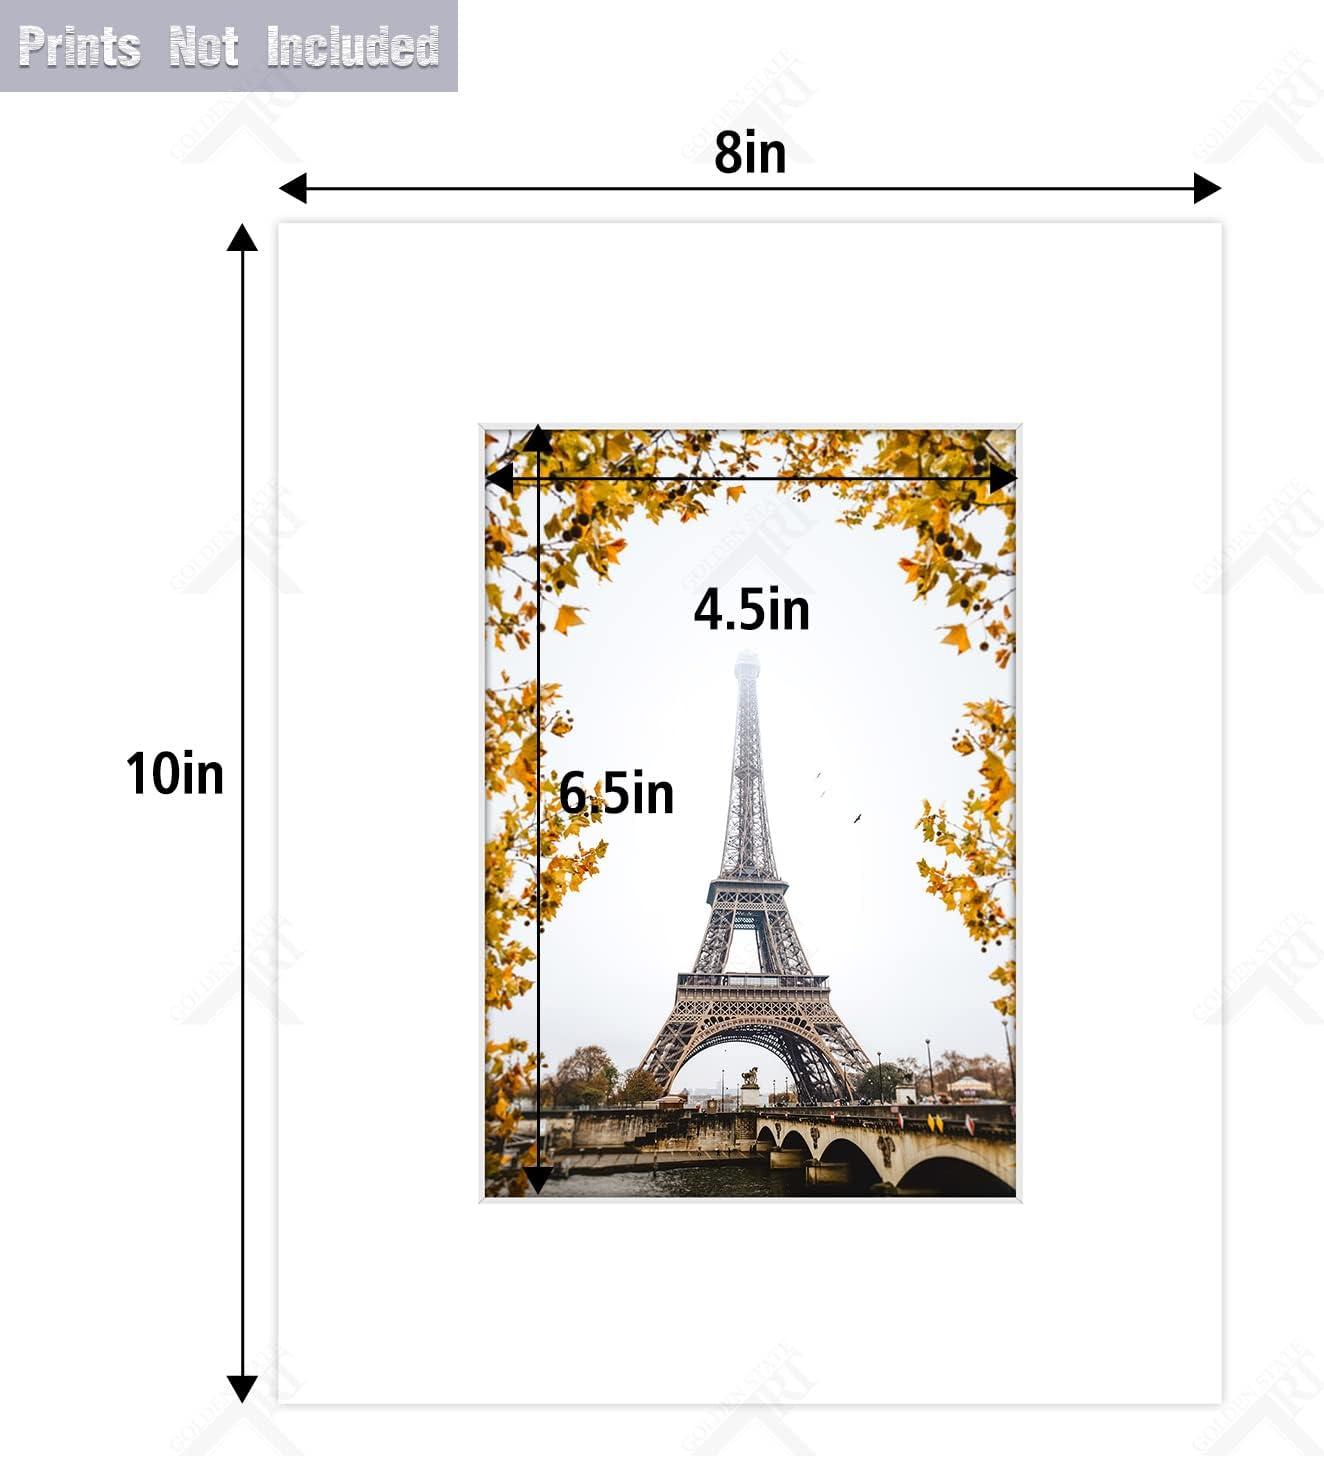 8x10 Mat for 5x7 Photo - White with Black Core Matboard for Frames Measuring 8 x 10 In- to Display Art Measuring 5 x 7 Inches